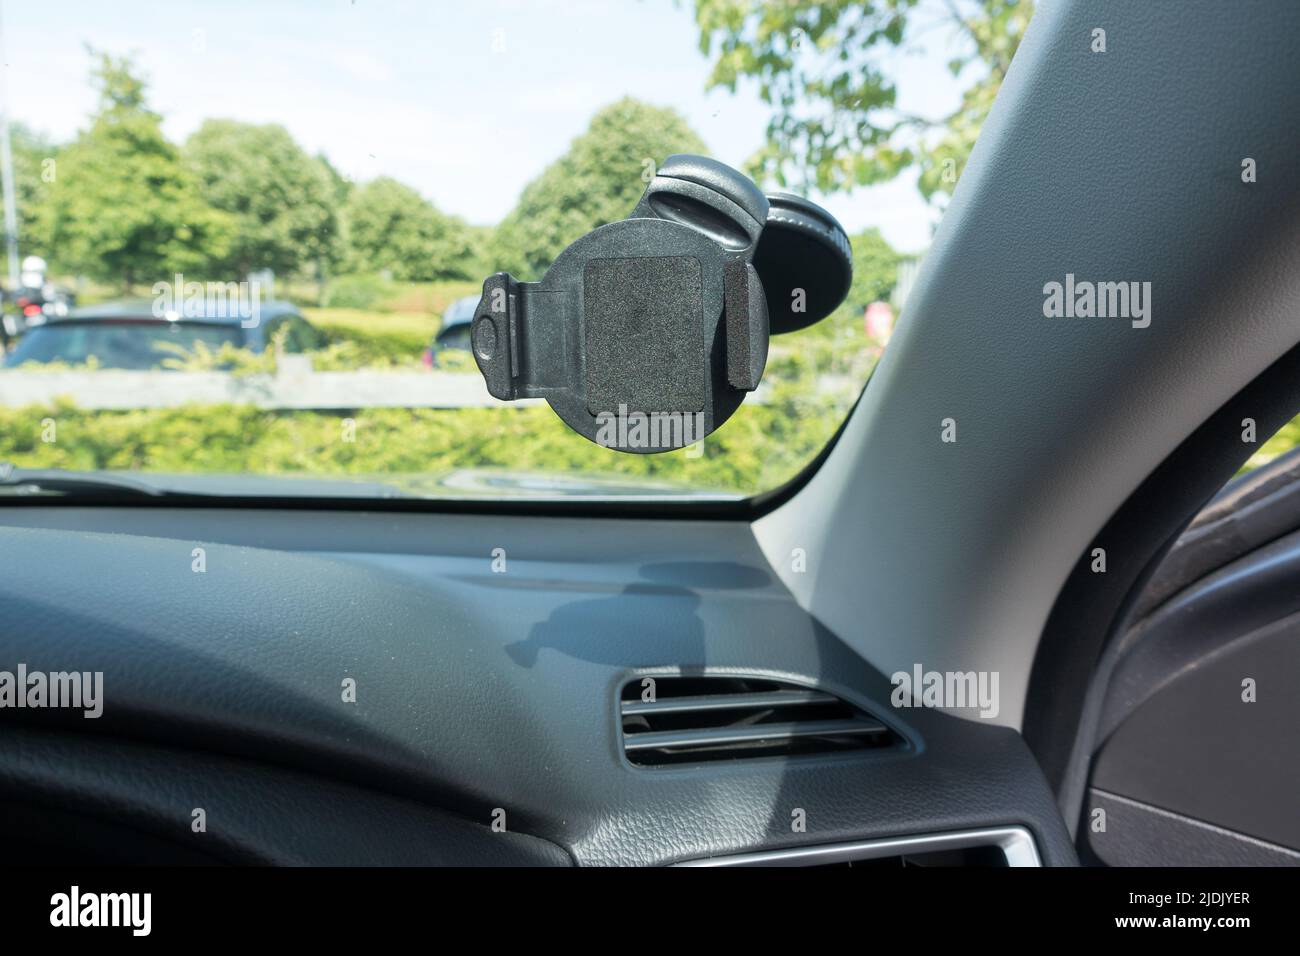 Mobile phone holder for navigational purpose in front of a car driver seat closer to the A post Stock Photo